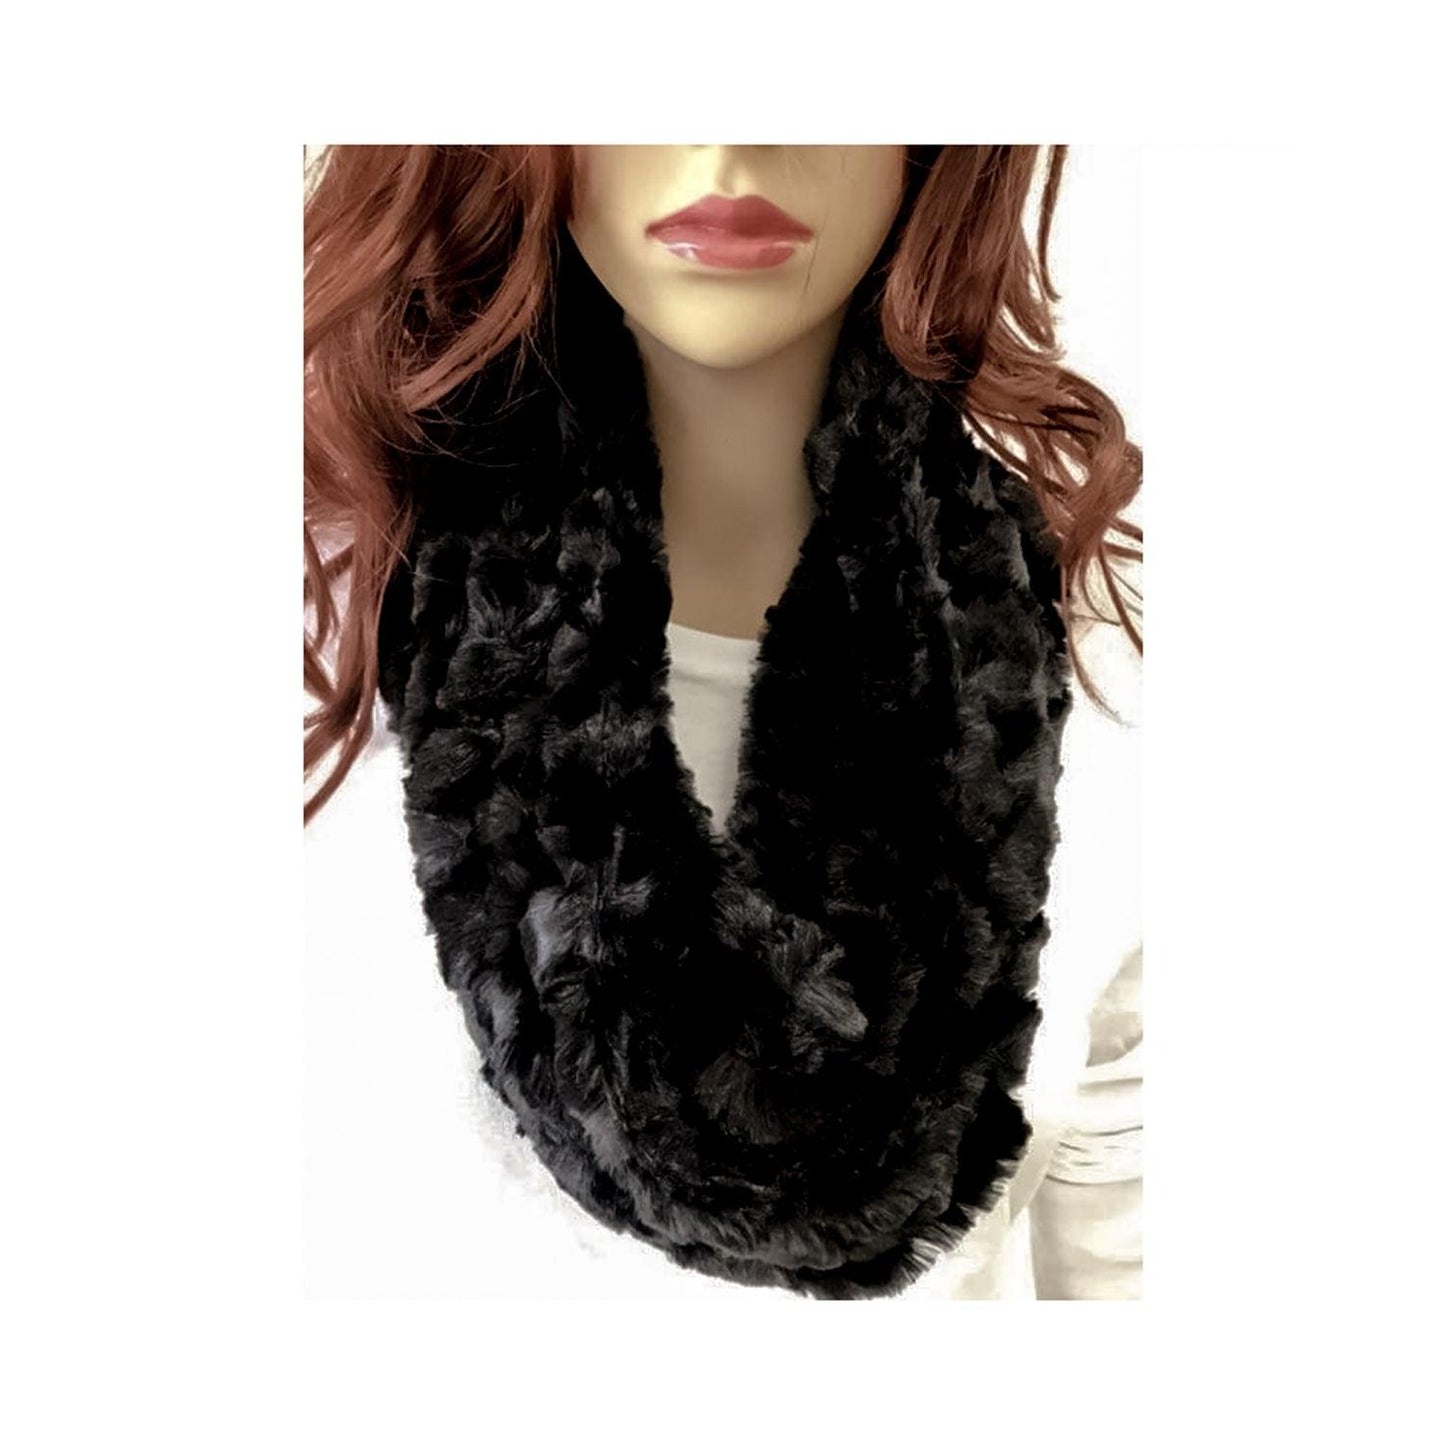 virah bella | rolling hearts infinity scarf in black | 33" by 6" - Home Revival Shop